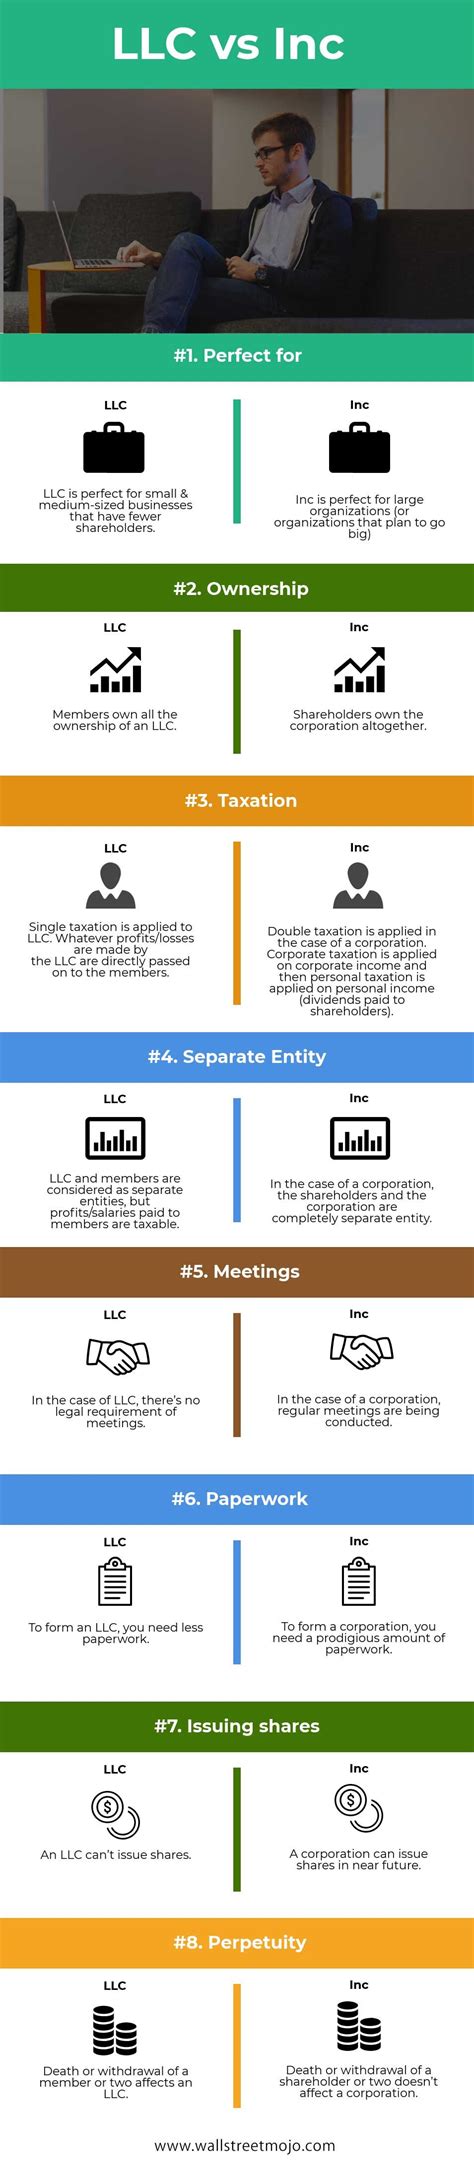 Llc Vs Inc Corporation Here We Provide You With The Top 8 Differences